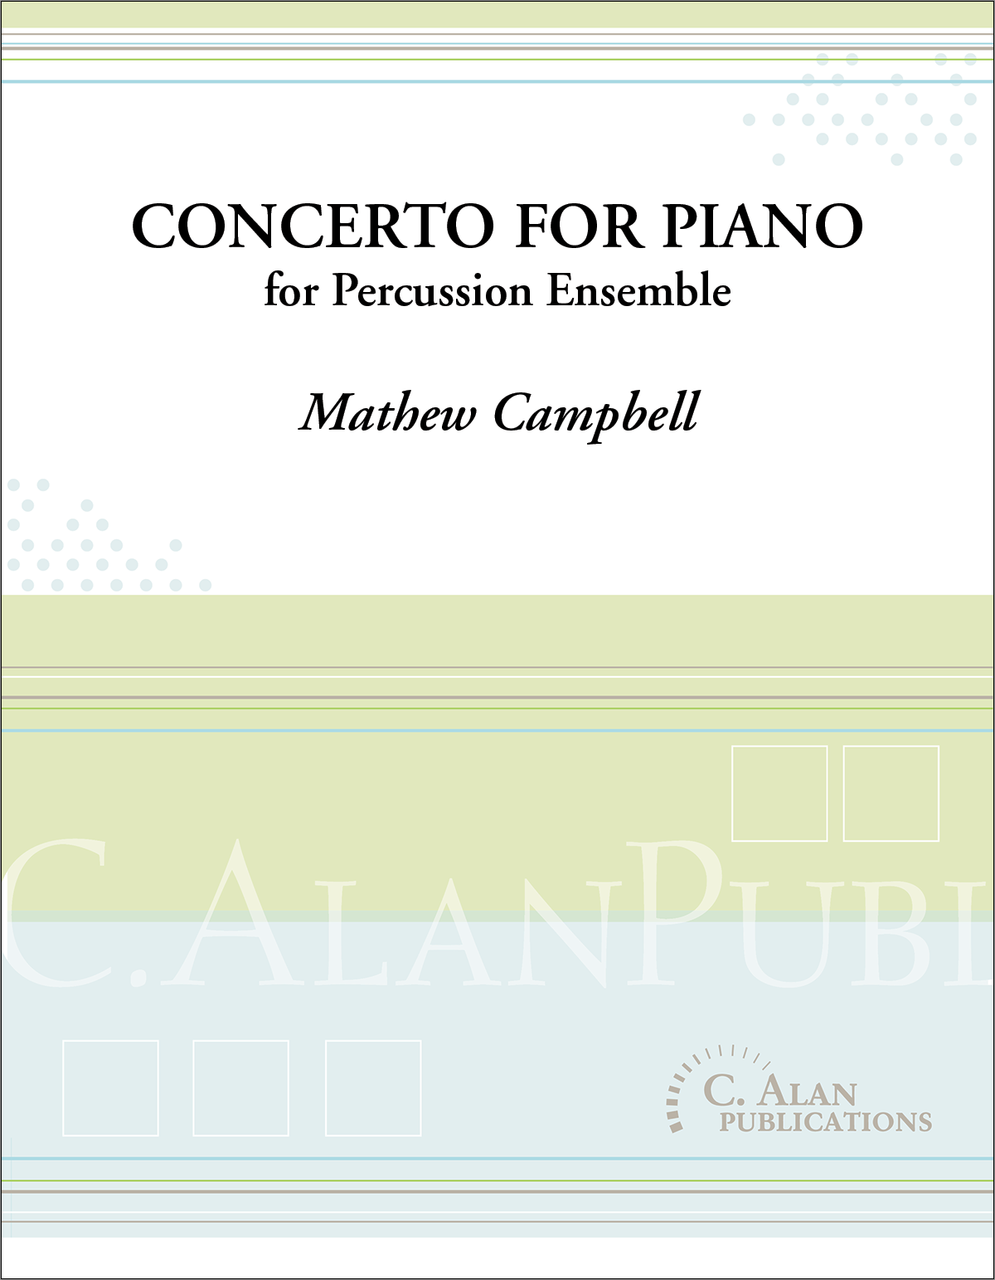 Concerto for Piano and Percussion Ensemble by Mathew Campbell